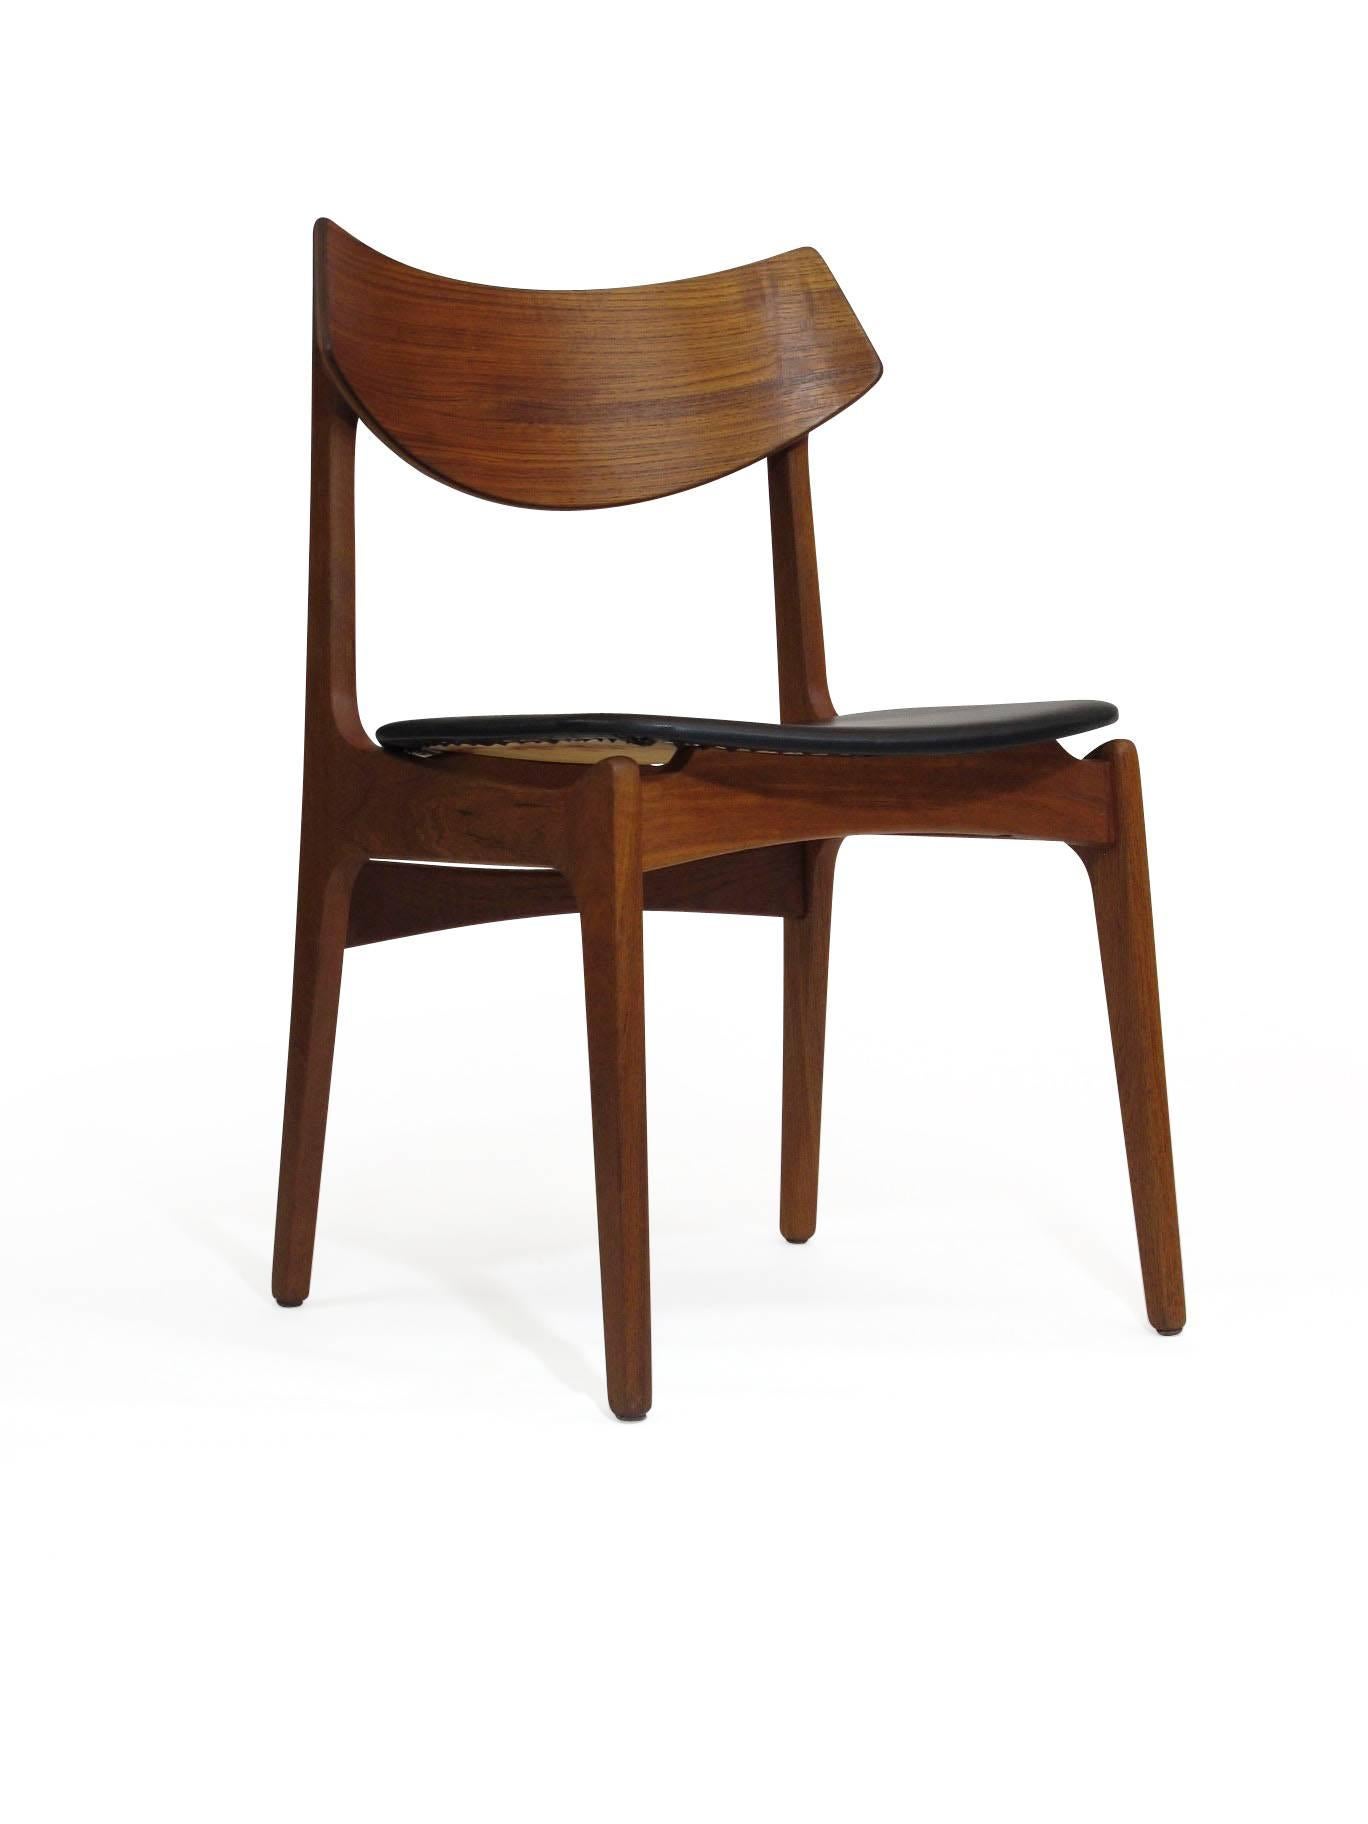 Ten midcentury dining chairs designed by Funder-Schmidt & Madsen, Denmark. Teak frames with bold curved backs and black vinyl seats. Comfortable back rest. The teak has been professionally restored. The chairs can be sold in sets of four, six, or